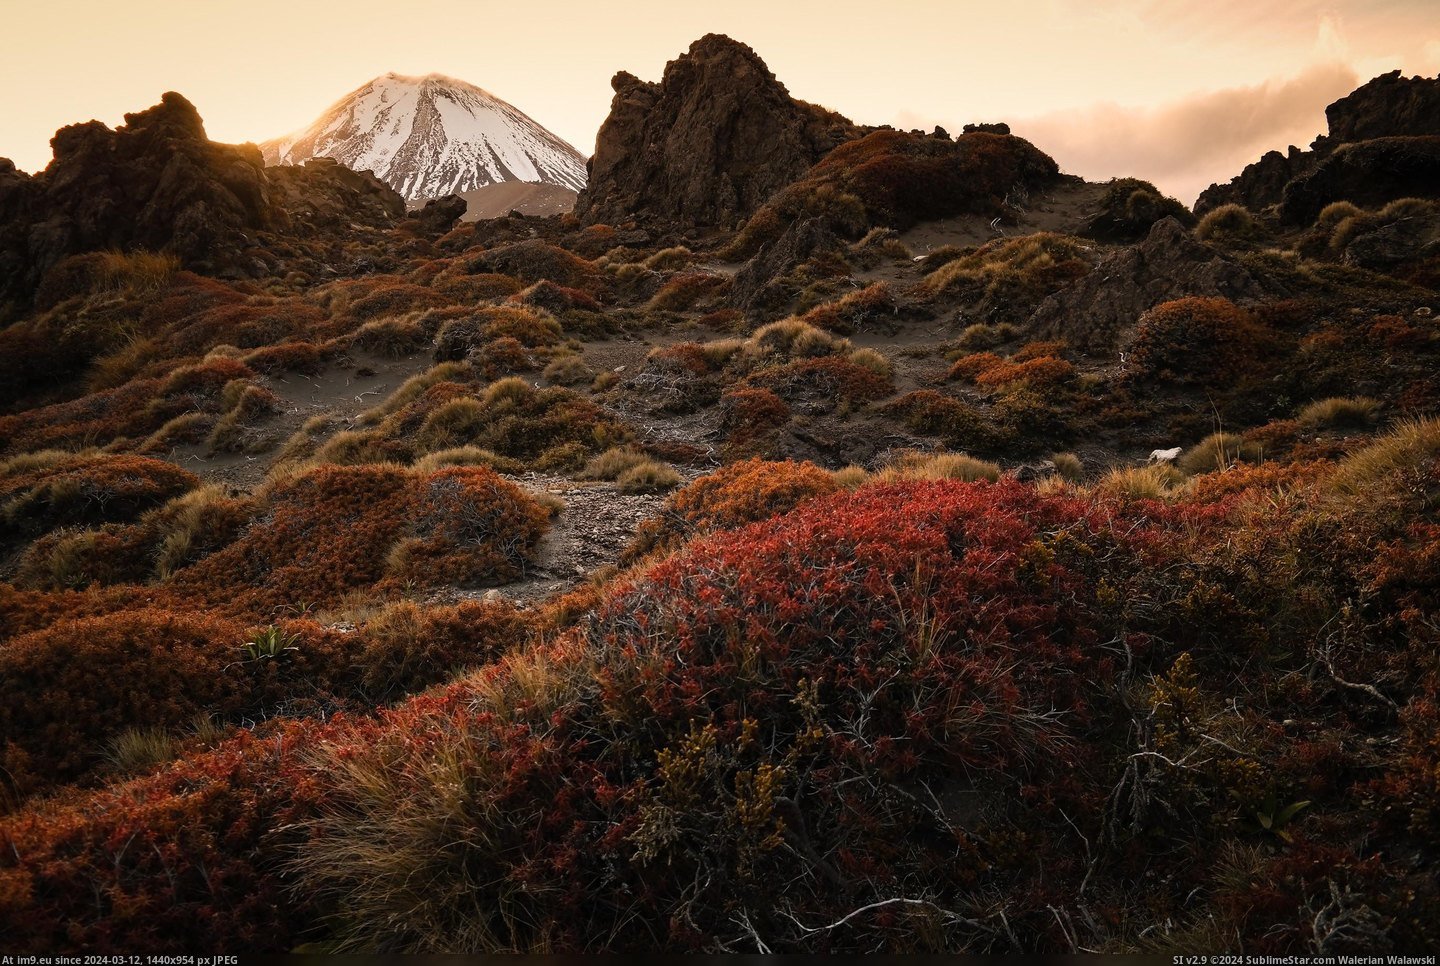 #Sun #Mount #Track #Dipping #Tongariro #Zealand #Northern [Earthporn] Probably need more New Zealand here. The sun dipping behind Mount Ngauruhoe from Oturere track, Tongariro Northern C Pic. (Obraz z album My r/EARTHPORN favs))